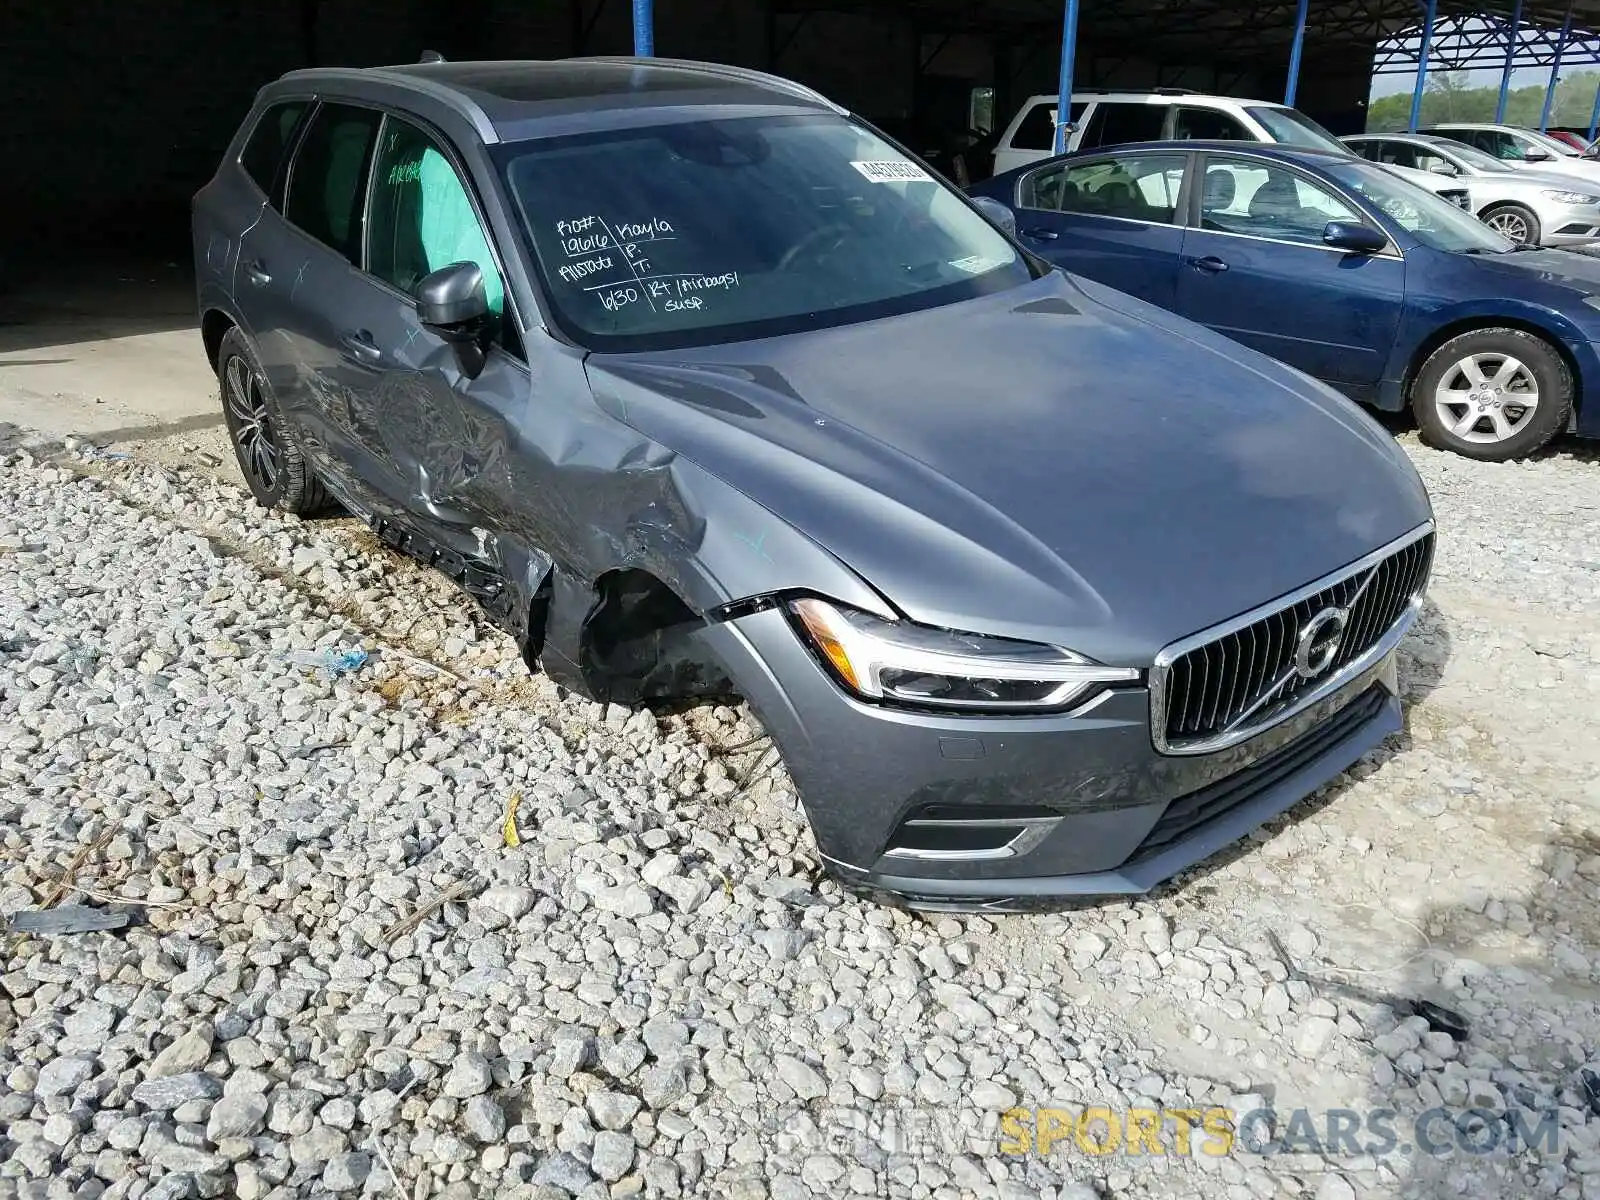 1 Photograph of a damaged car YV4102RLXL1428862 VOLVO XC60 T5 IN 2020